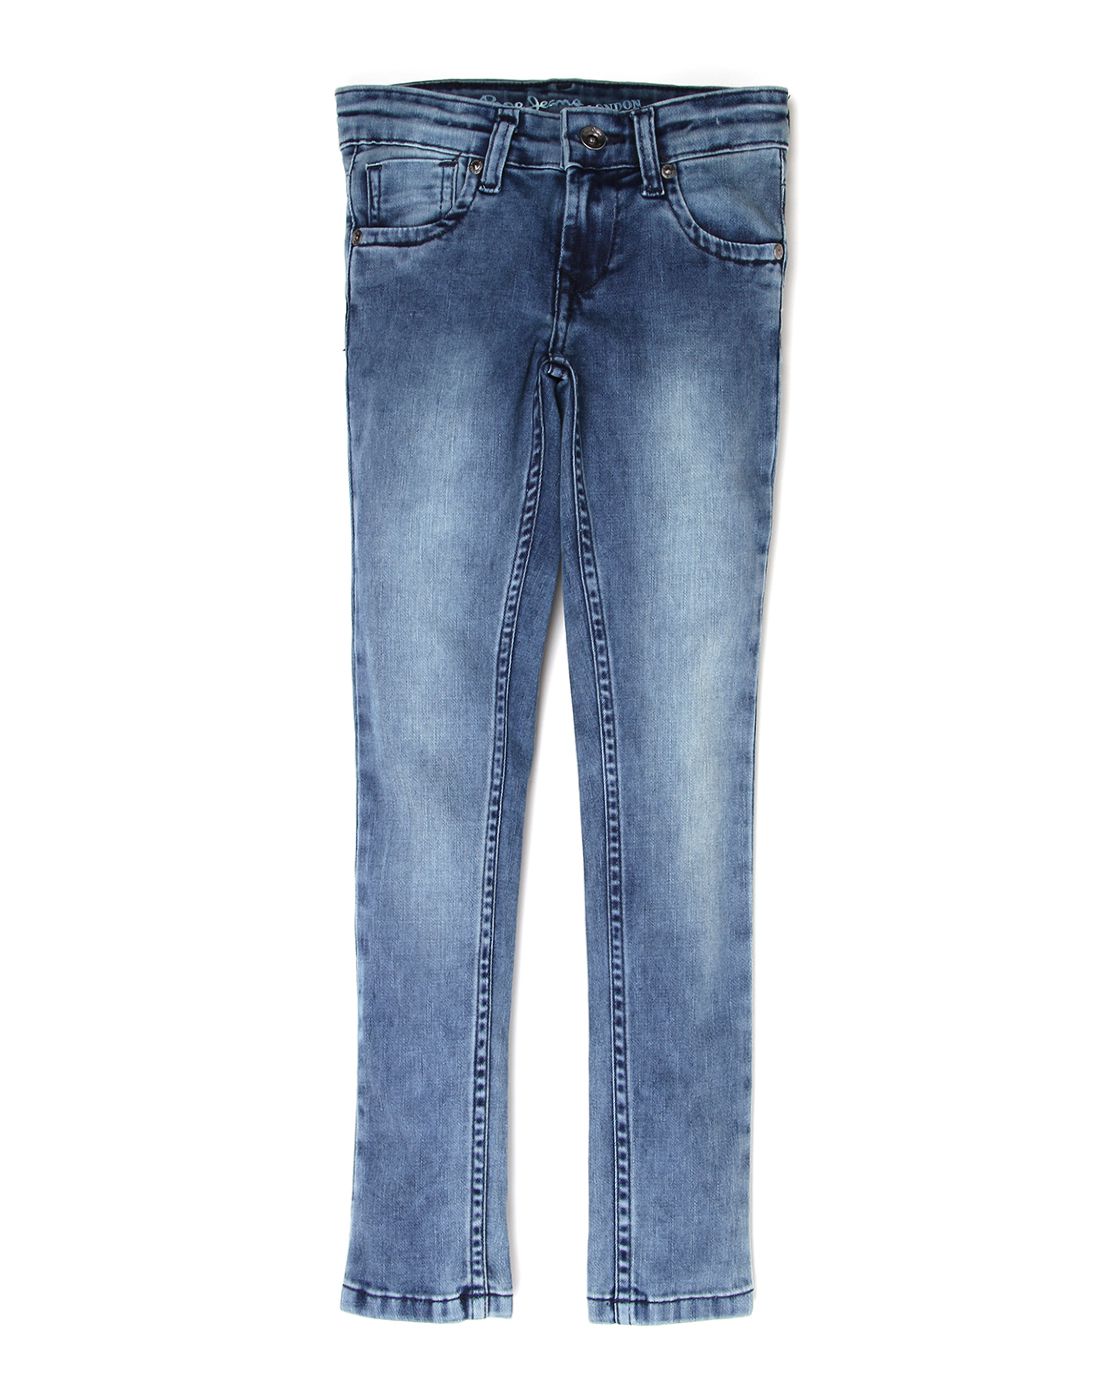 Pepe Jeans Girls Cotton Light Fade Slim Fit Casual Blue Jeans - Buy ...